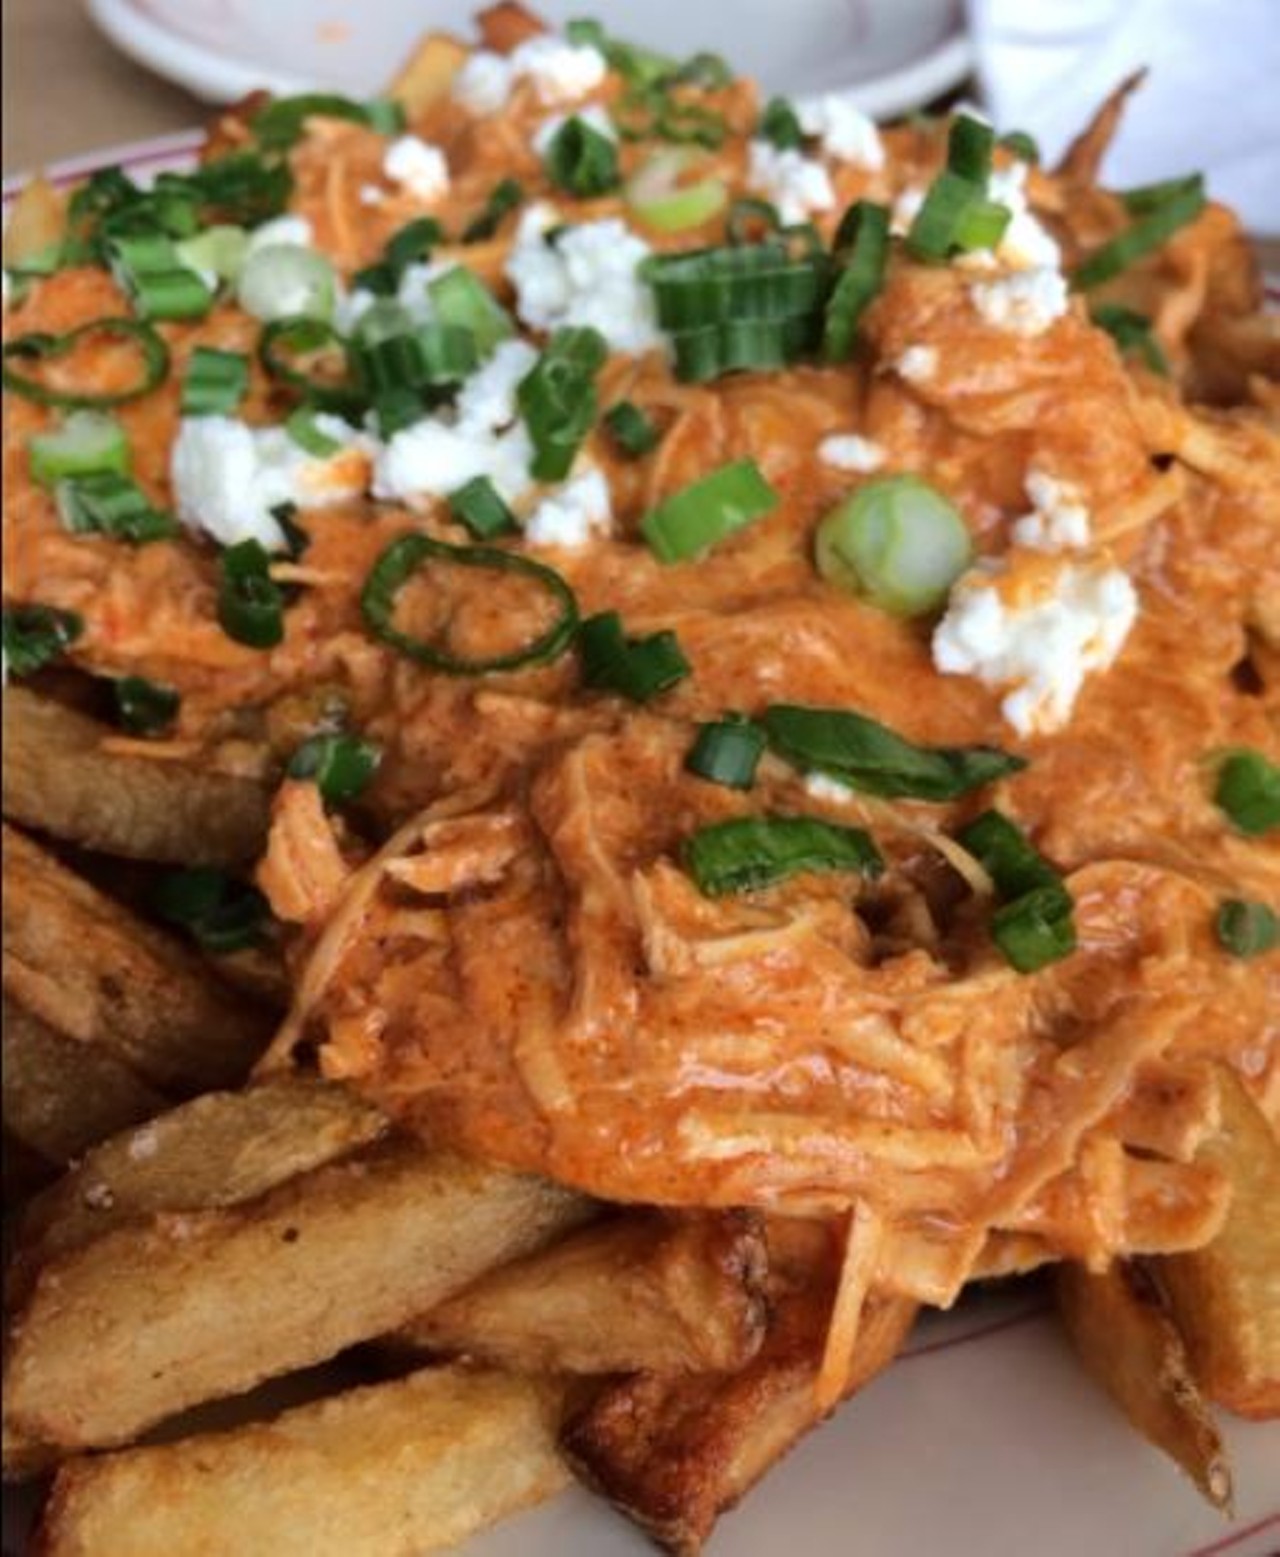 What to Order - Tikka Fries 
This radical spin on Coney fries includes hand cut fries topped with chicken tikka masala, house made paneer and chopped scallions. A fan favorite!
Photo via Mi L. 